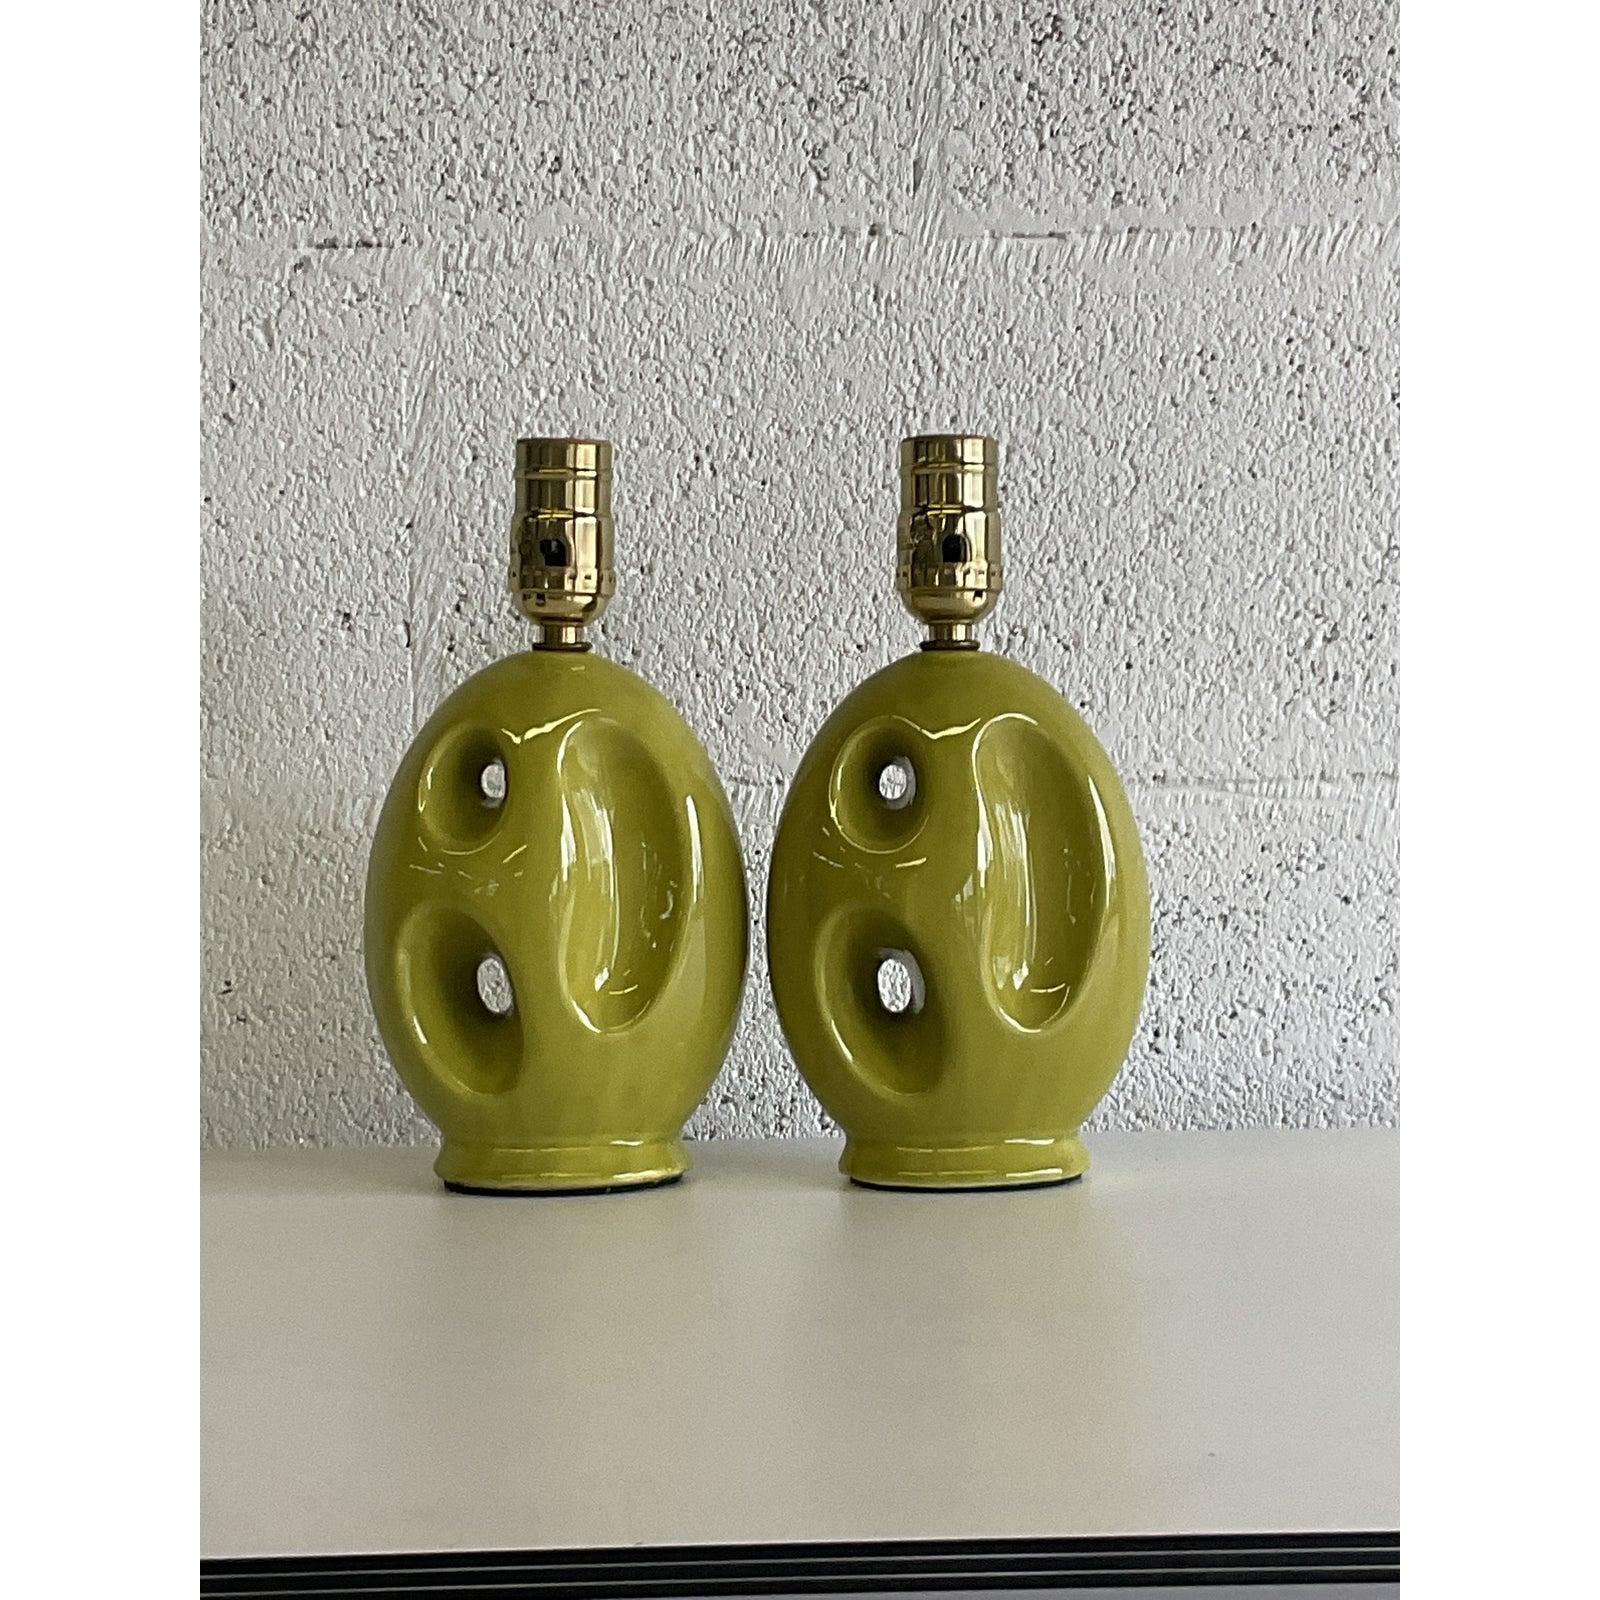 Fabulous pair of vintage MCM boudoir lamps. Chic little Abstract forms in a brilliant chartreuse green. All new wiring and hardware done by Heath Lighting in Palm Beach. Acquired from a Palm Beach estate.